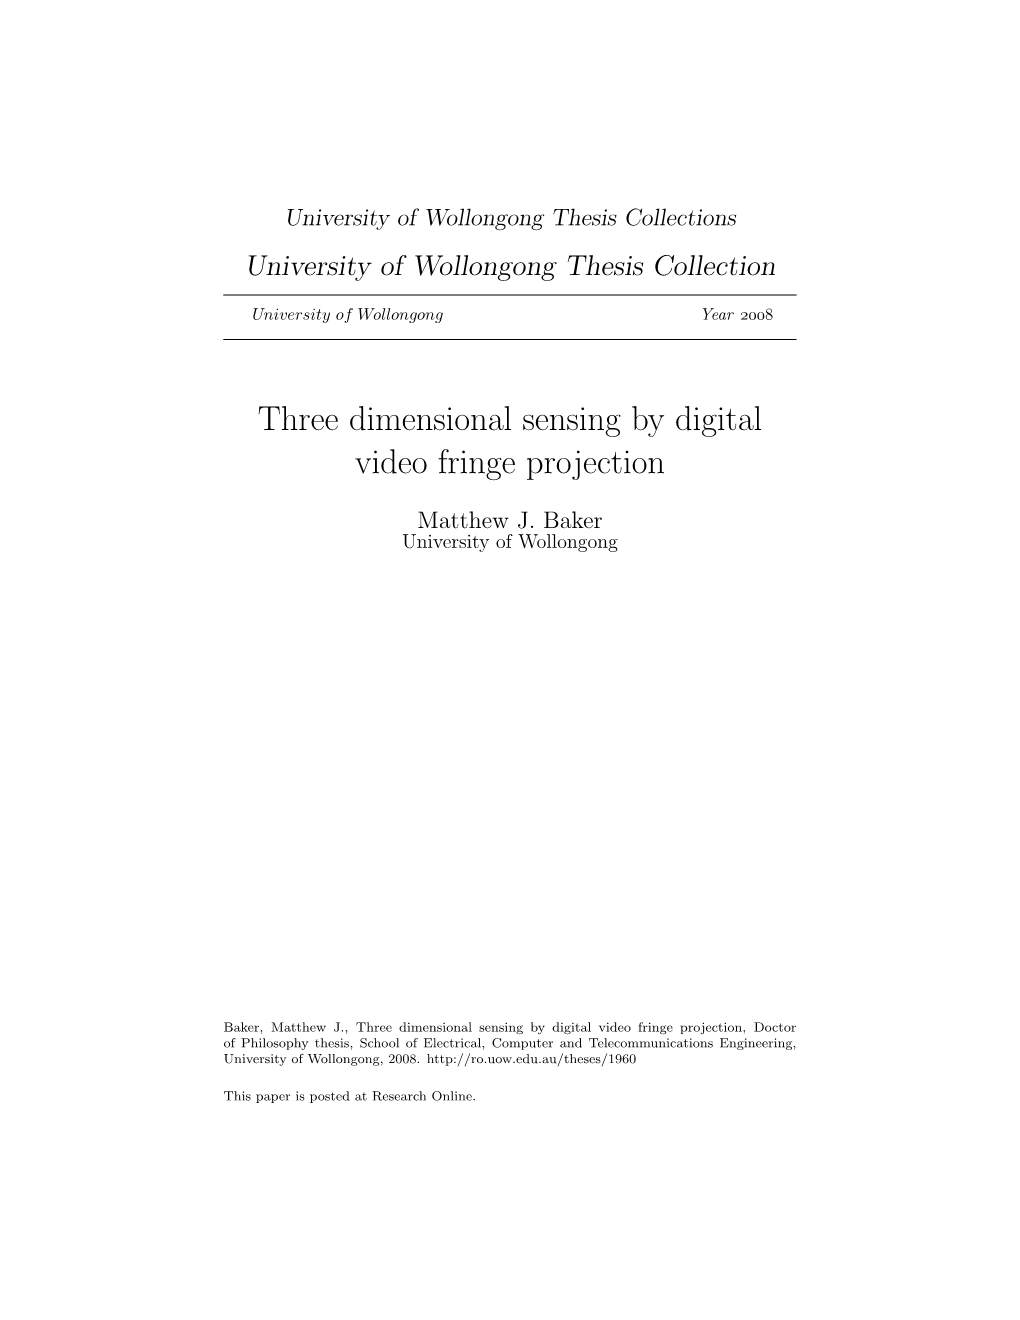 Three Dimensional Sensing by Digital Video Fringe Projection